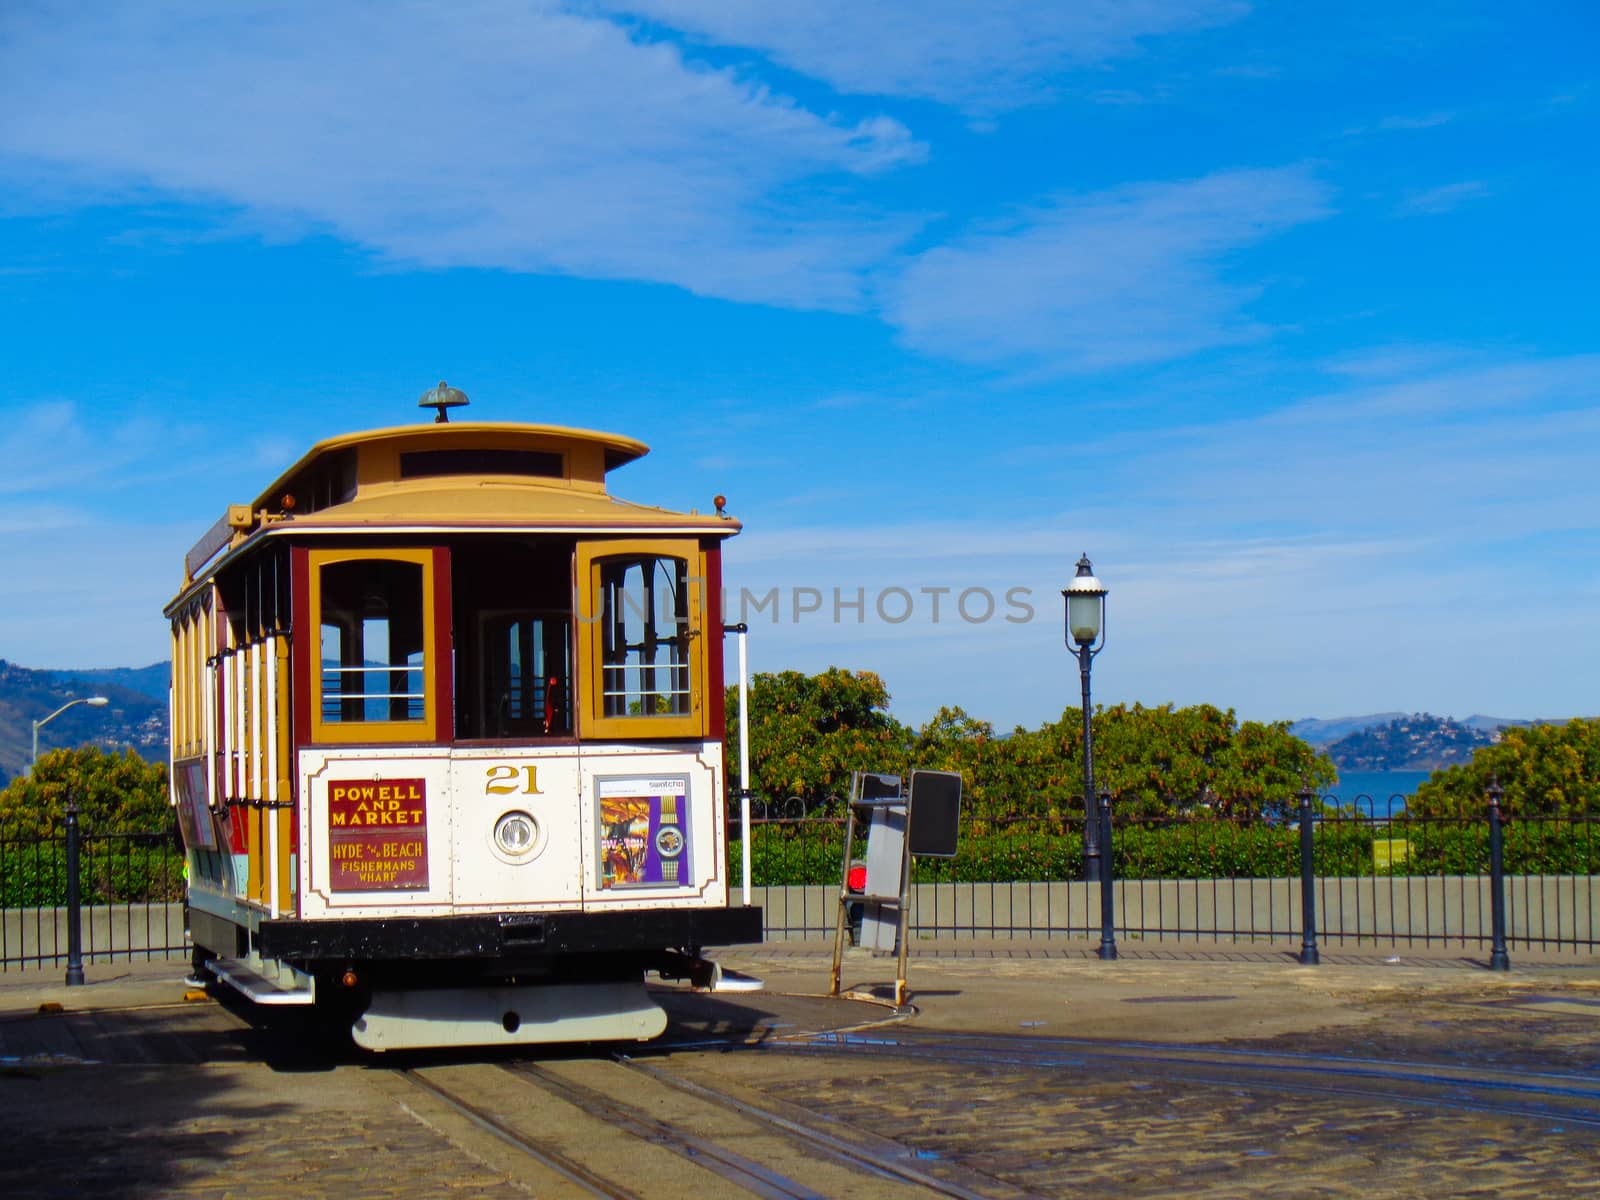 San Franciso with the tram by Tevion25